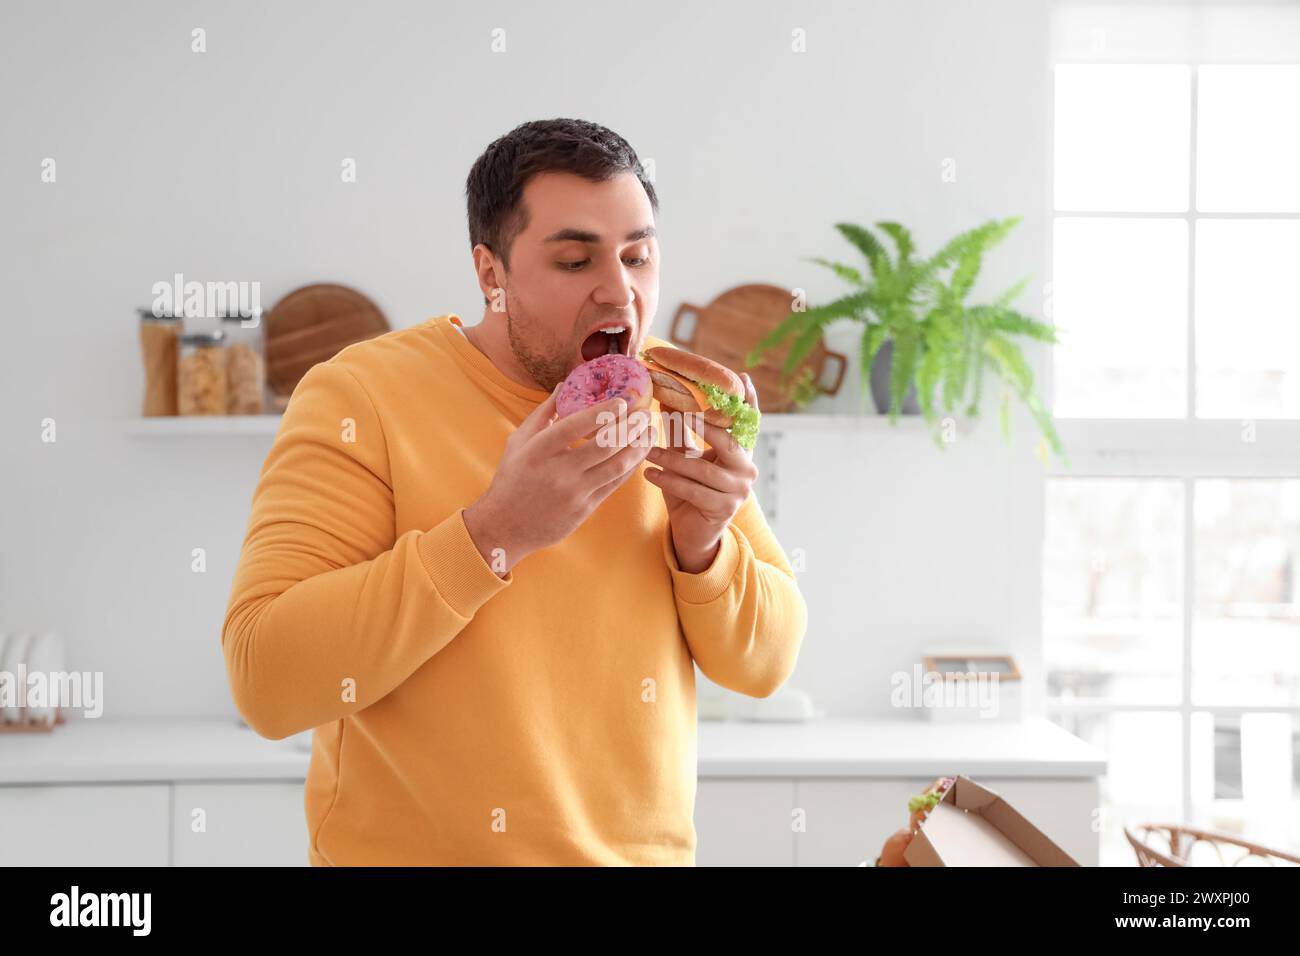 Young man eating burger and doughnut in kitchen. Overeating concept Stock Photo